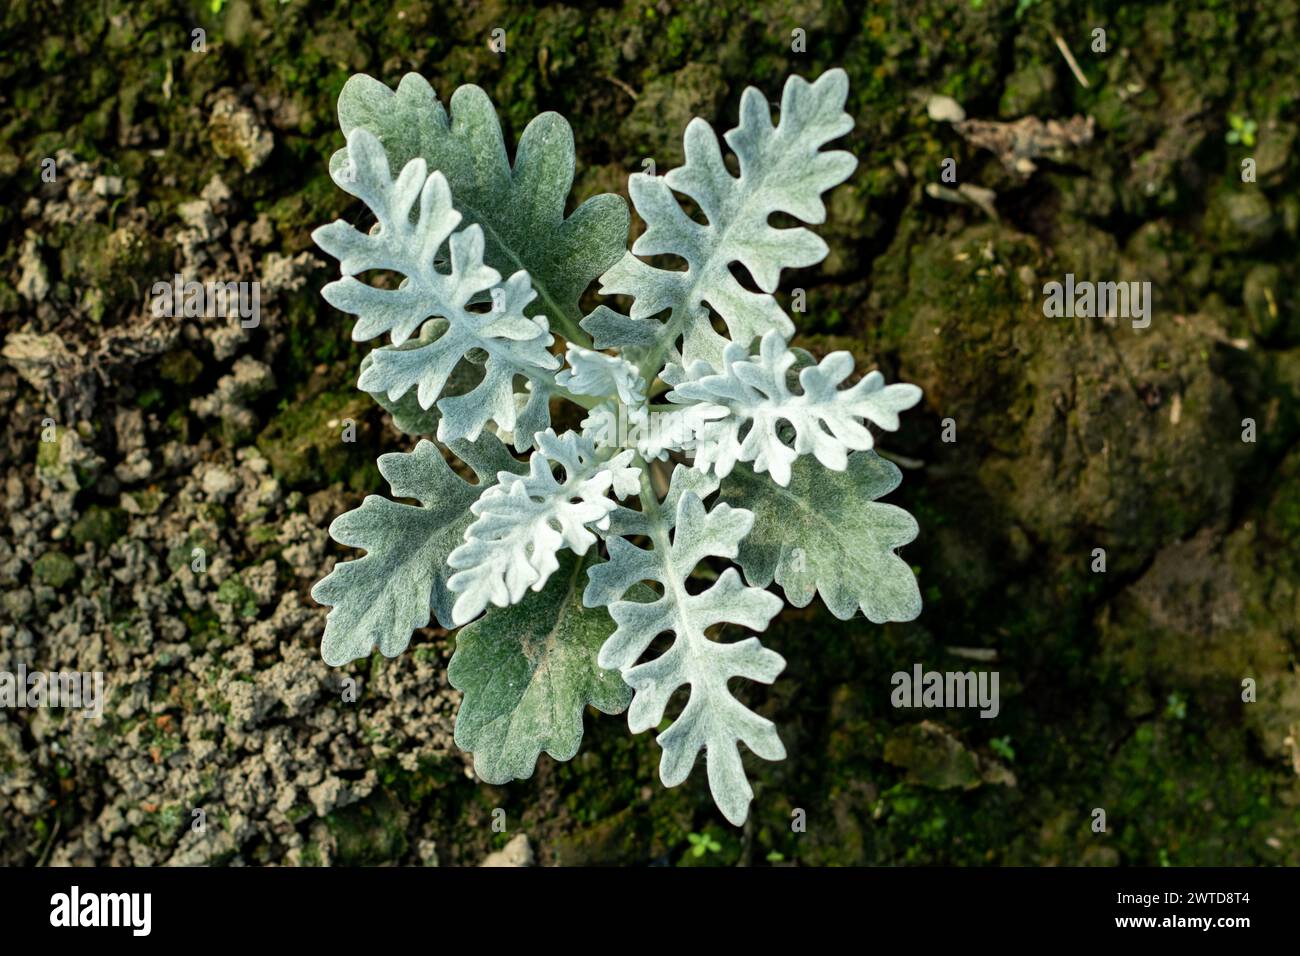 Silver ragwort, sometimes also called maritime ragwort, produces metal-gray-colored leaves that are surprisingly attractive. The silver ragwort is a h Stock Photo